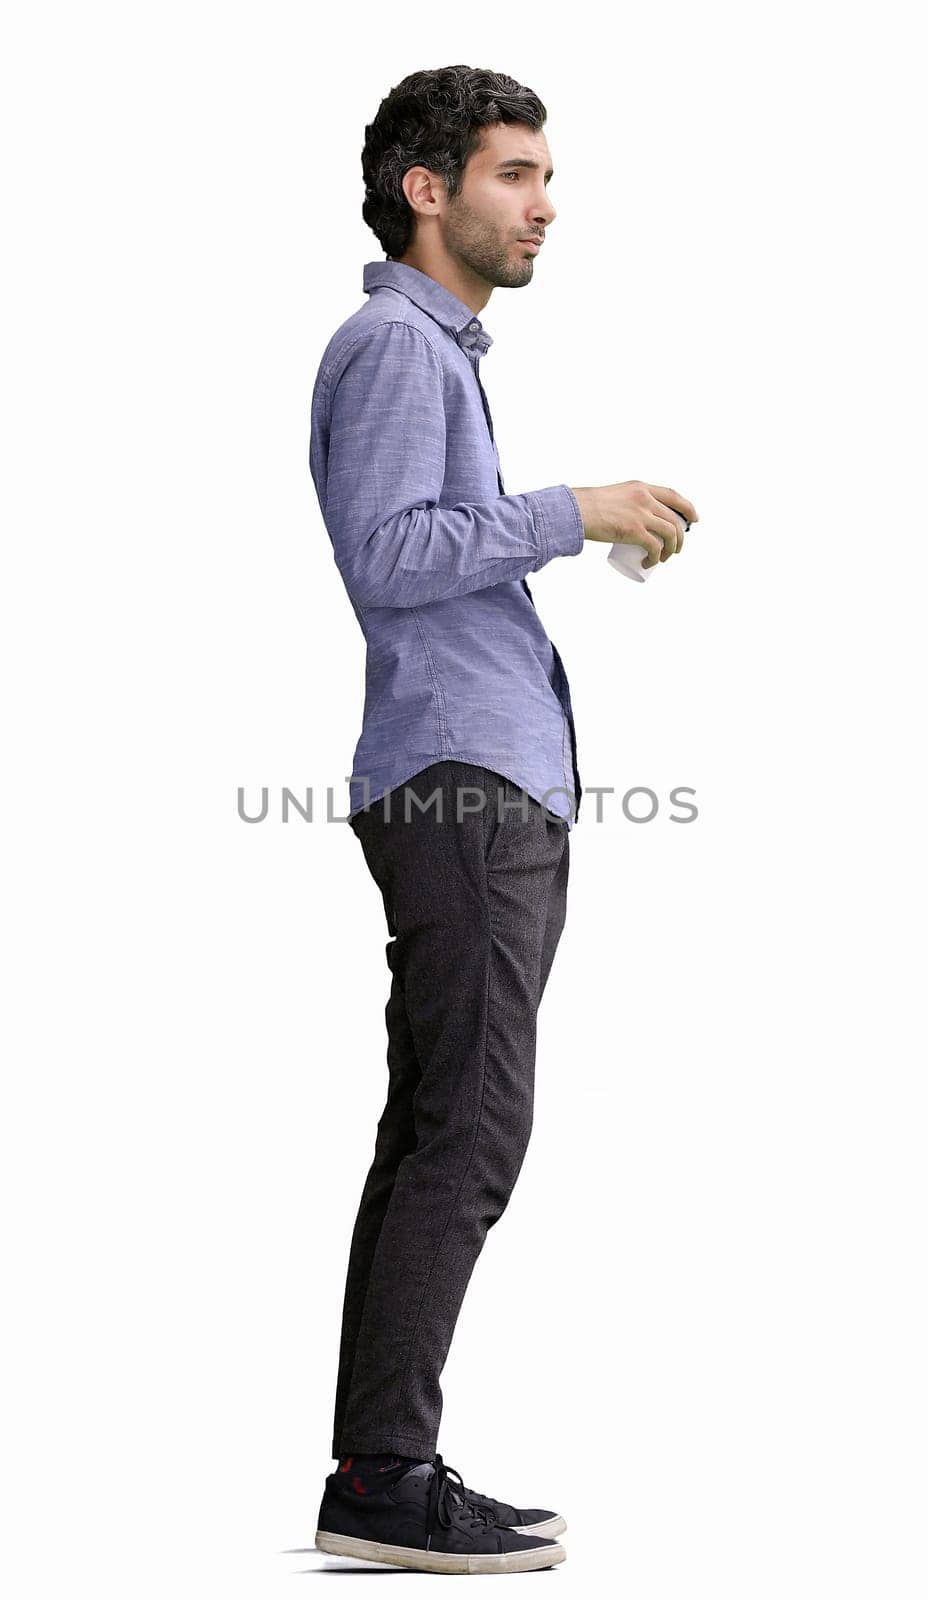 young man in full growth. isolated on white background. holding a mug of coffee.